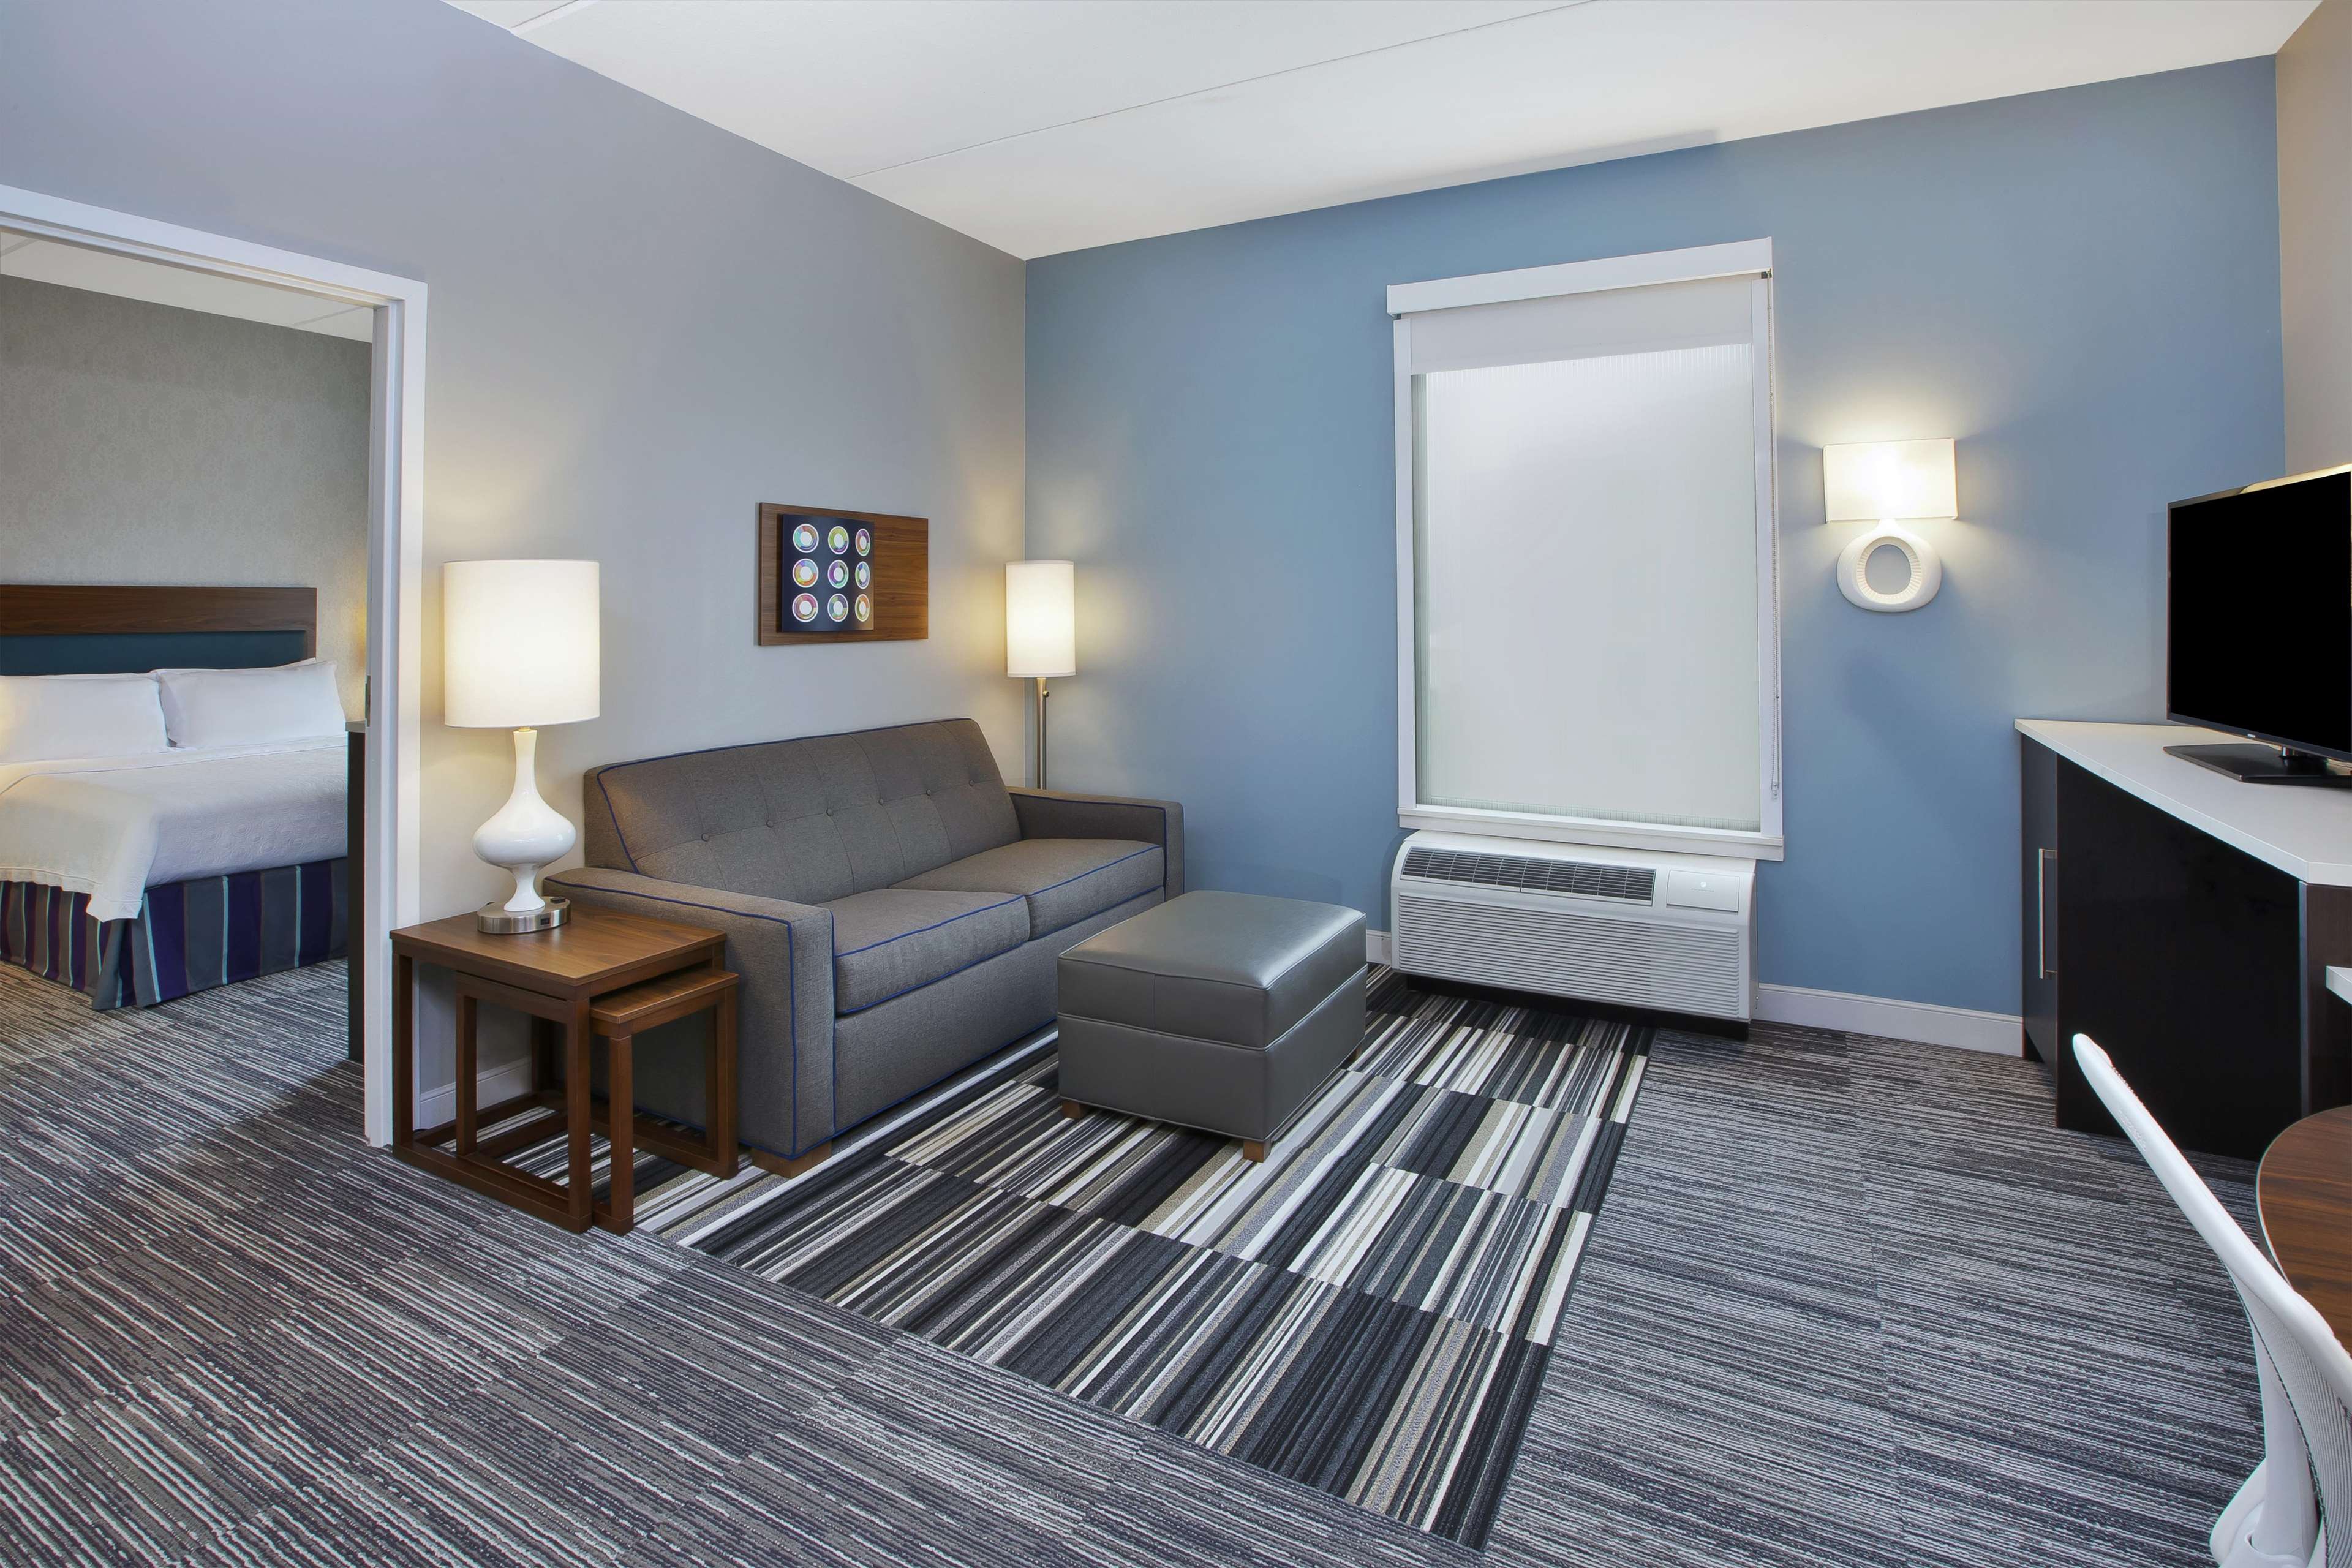 Home2 Suites by Hilton Pittsburgh Area Beaver Valley Photo